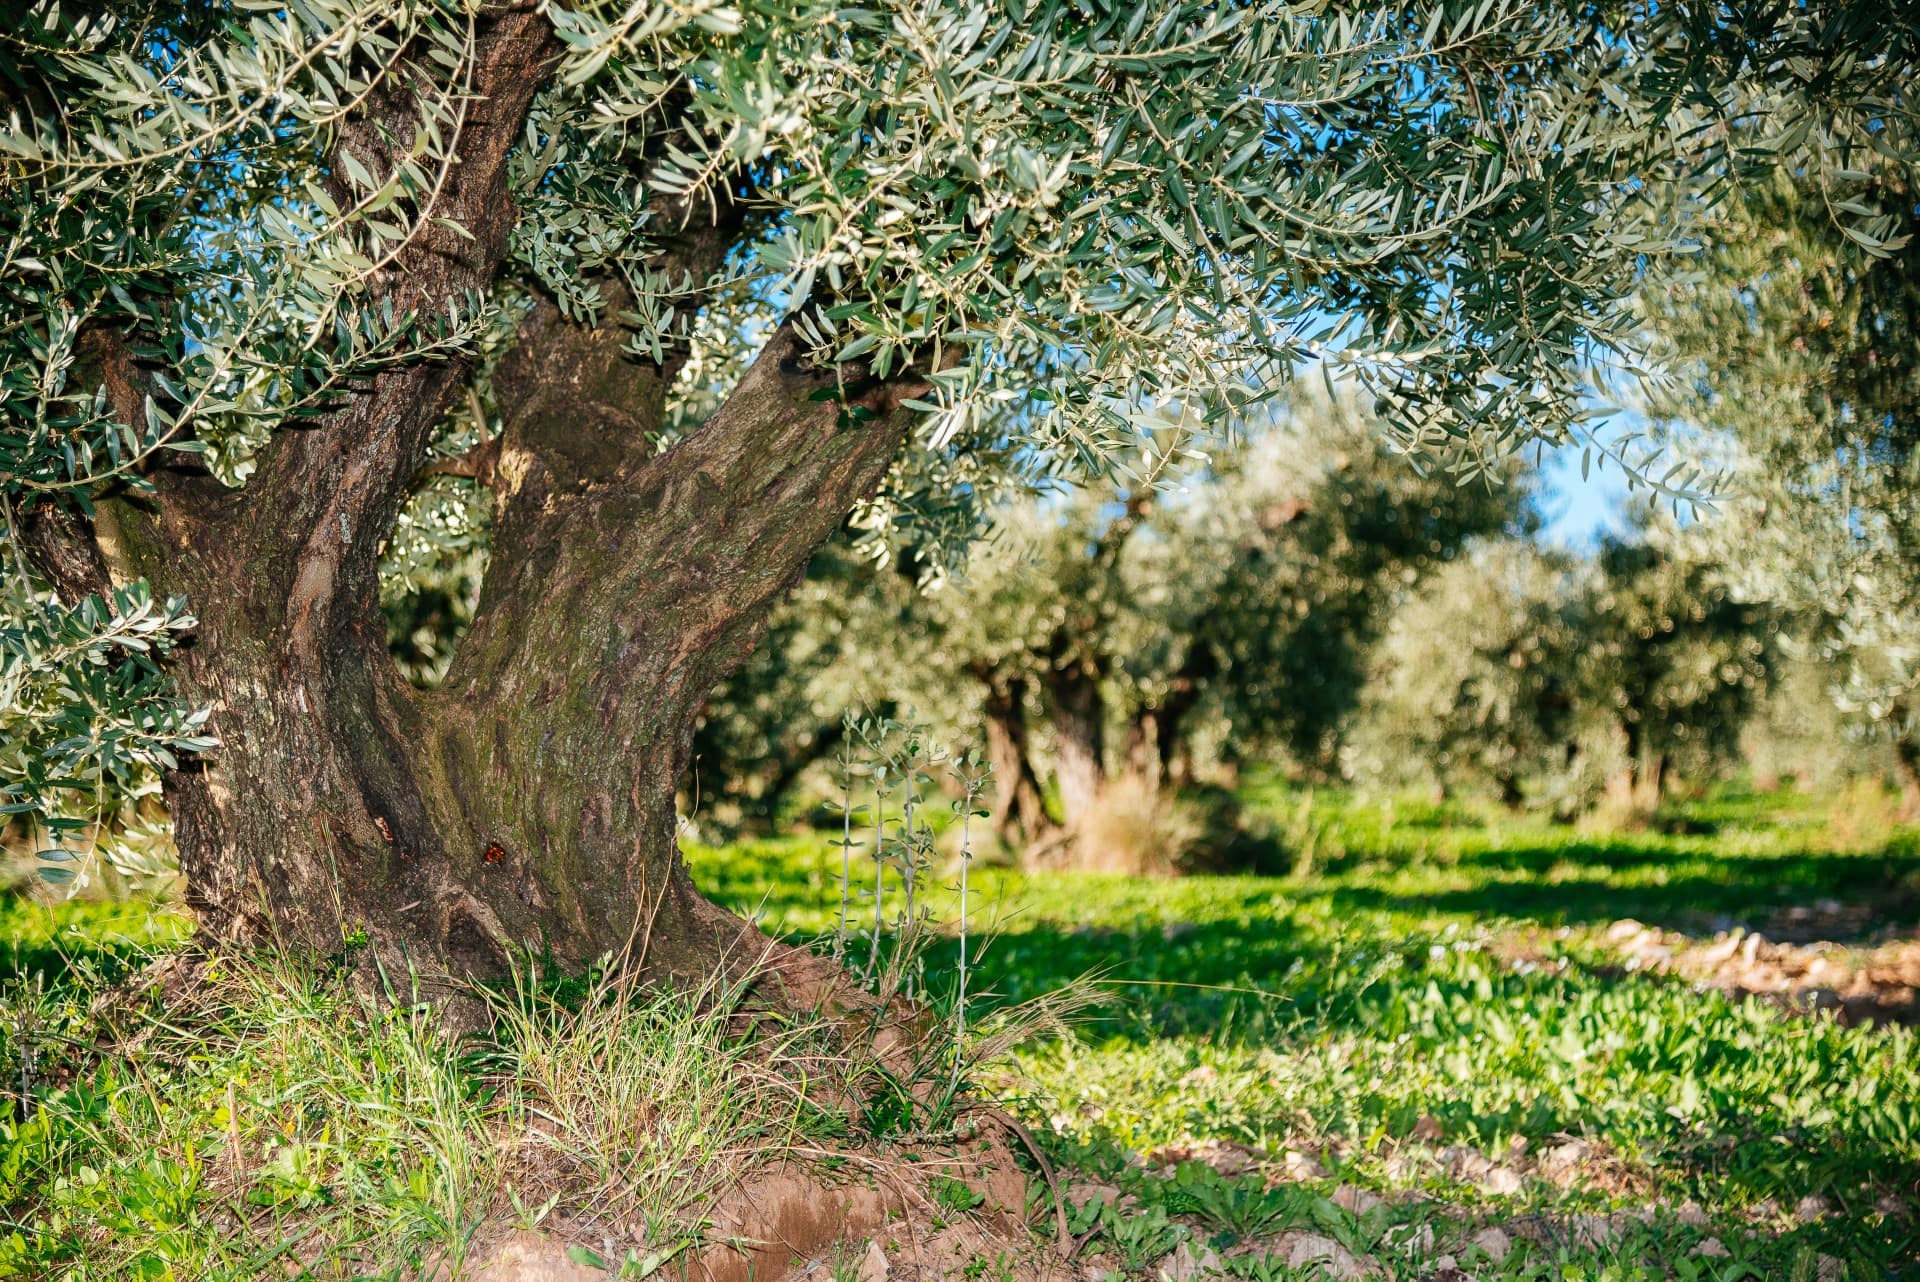 europe-profiles-the-best-olive-oils-production-a-family-tradition-takes-root-at-moulin-de-la-coquille-olive-oil-times